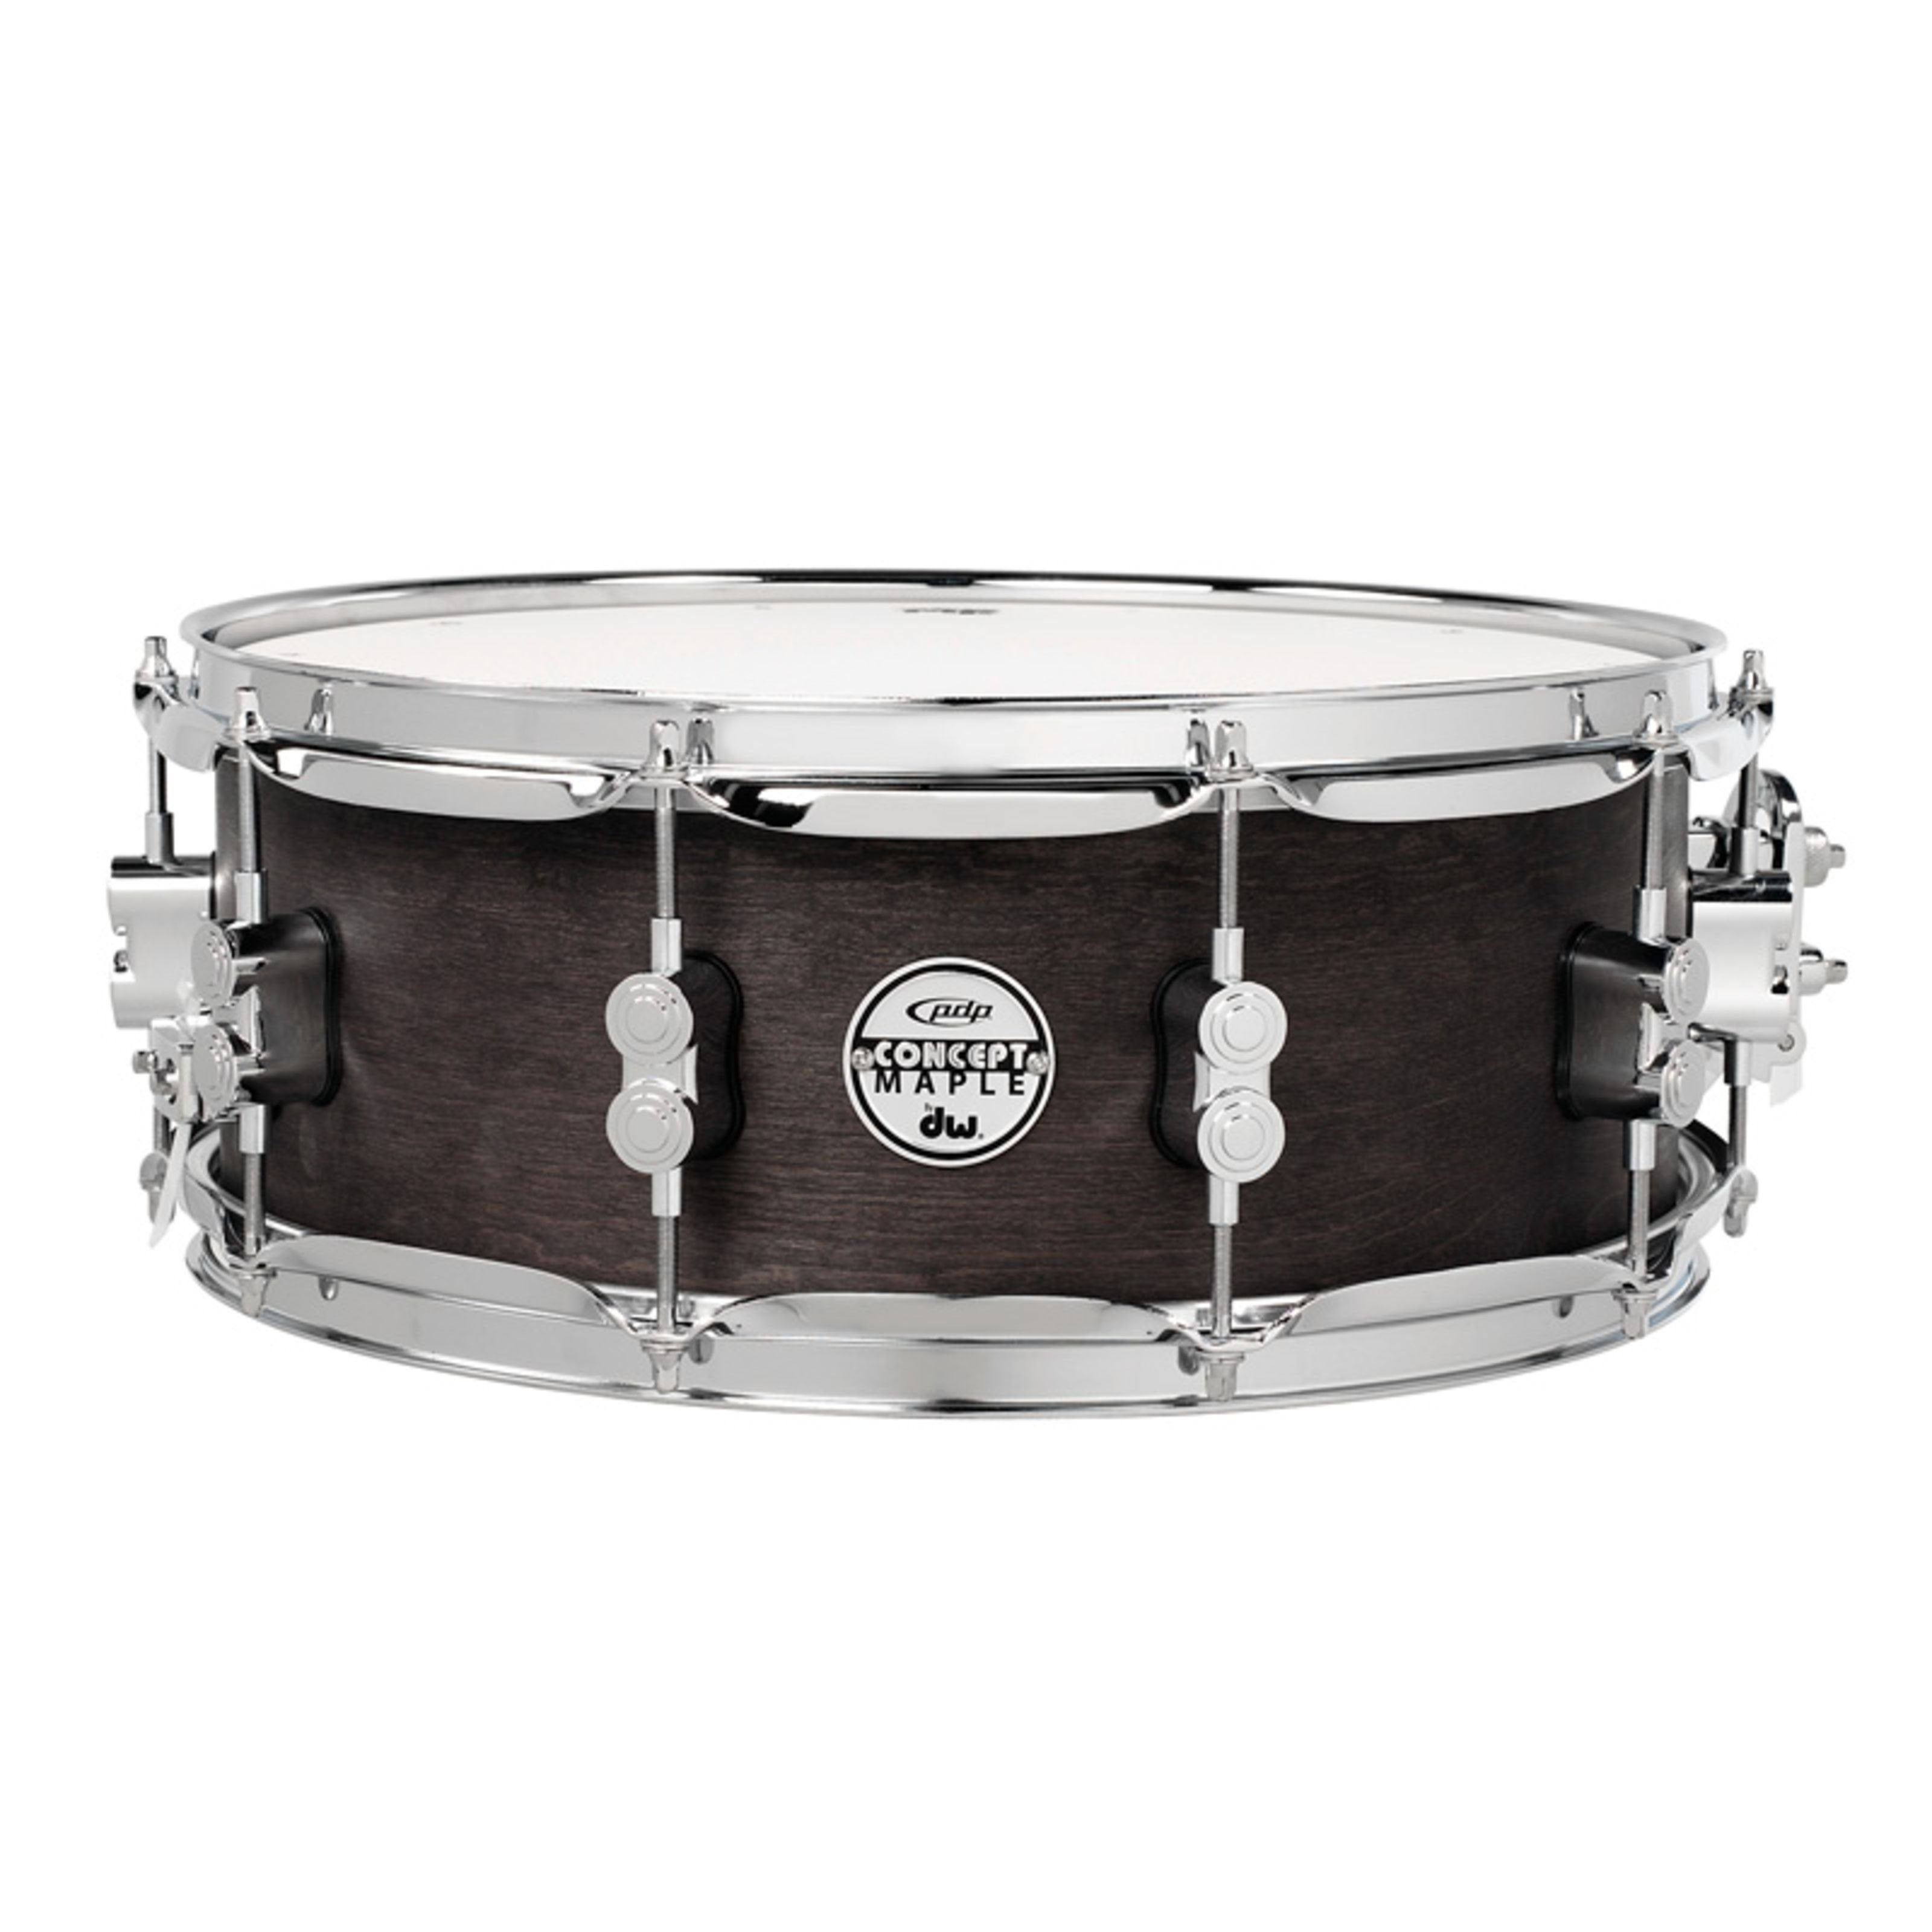 pdp Snare Drum,Black Wax Snare 14"x5,5", Schlagzeuge, Snare Drums, Black Wax Snare 14"x5,5" - Snare Drum